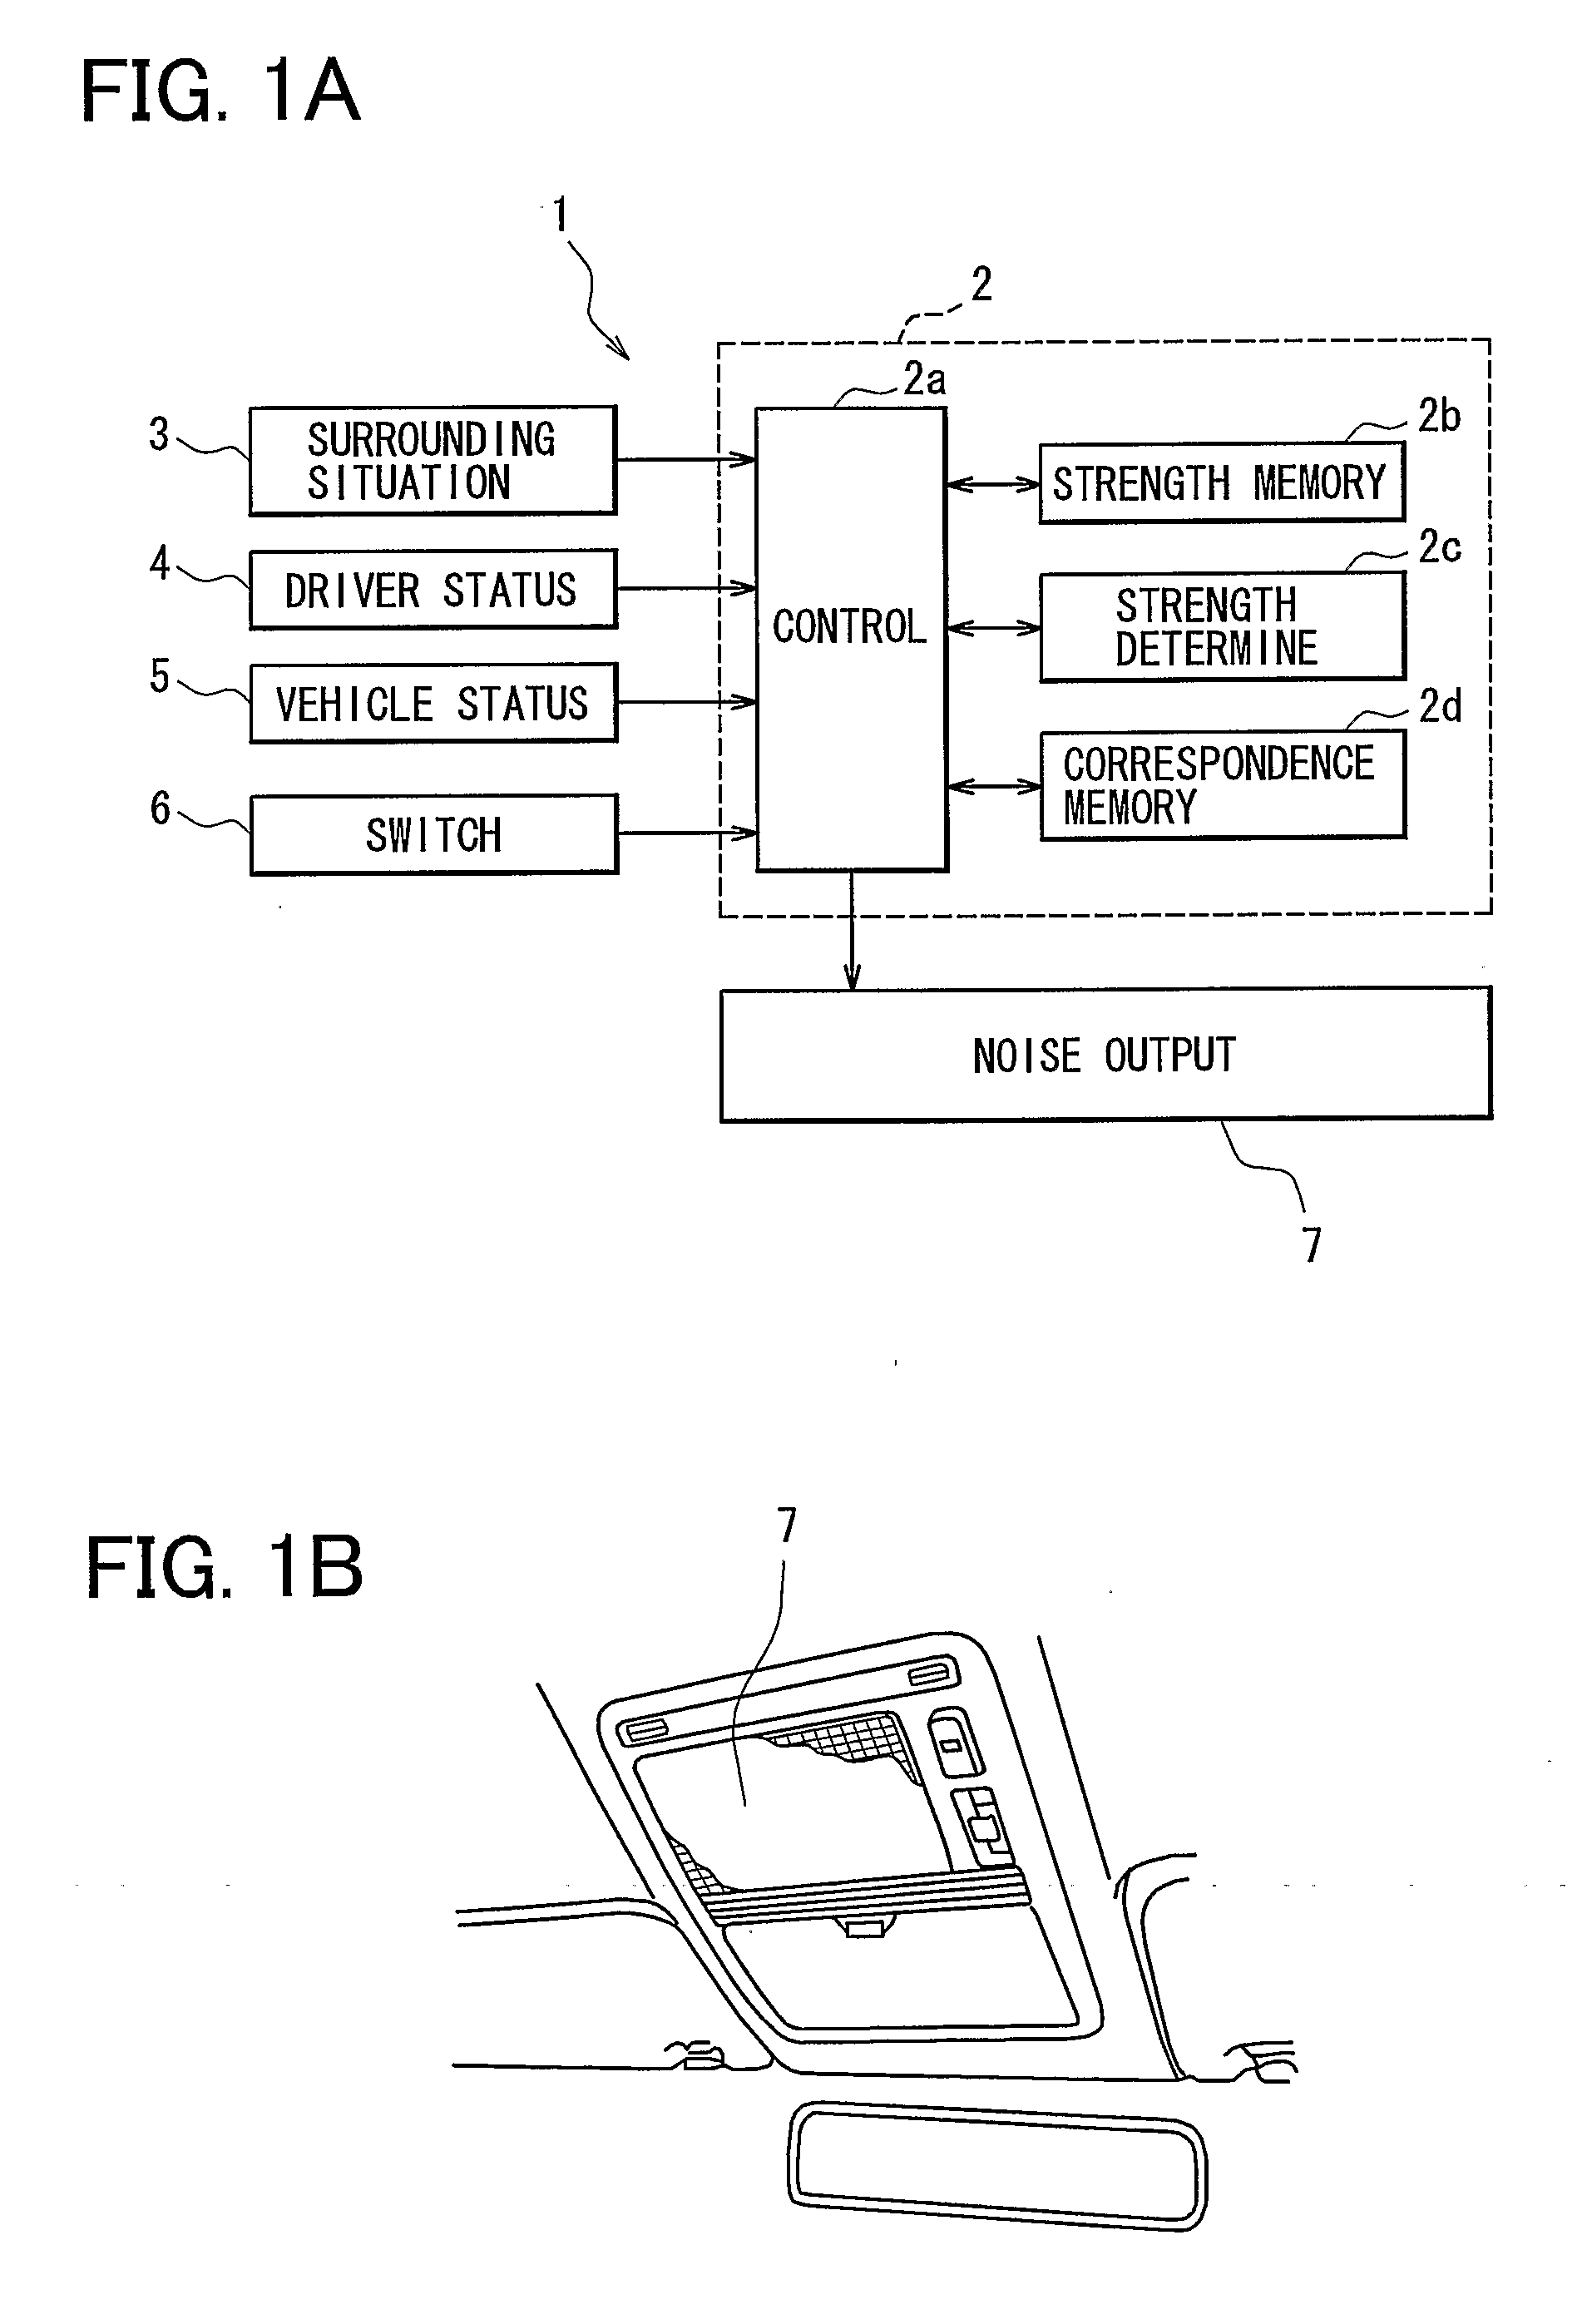 Visual Ability Improvement Supporting Device